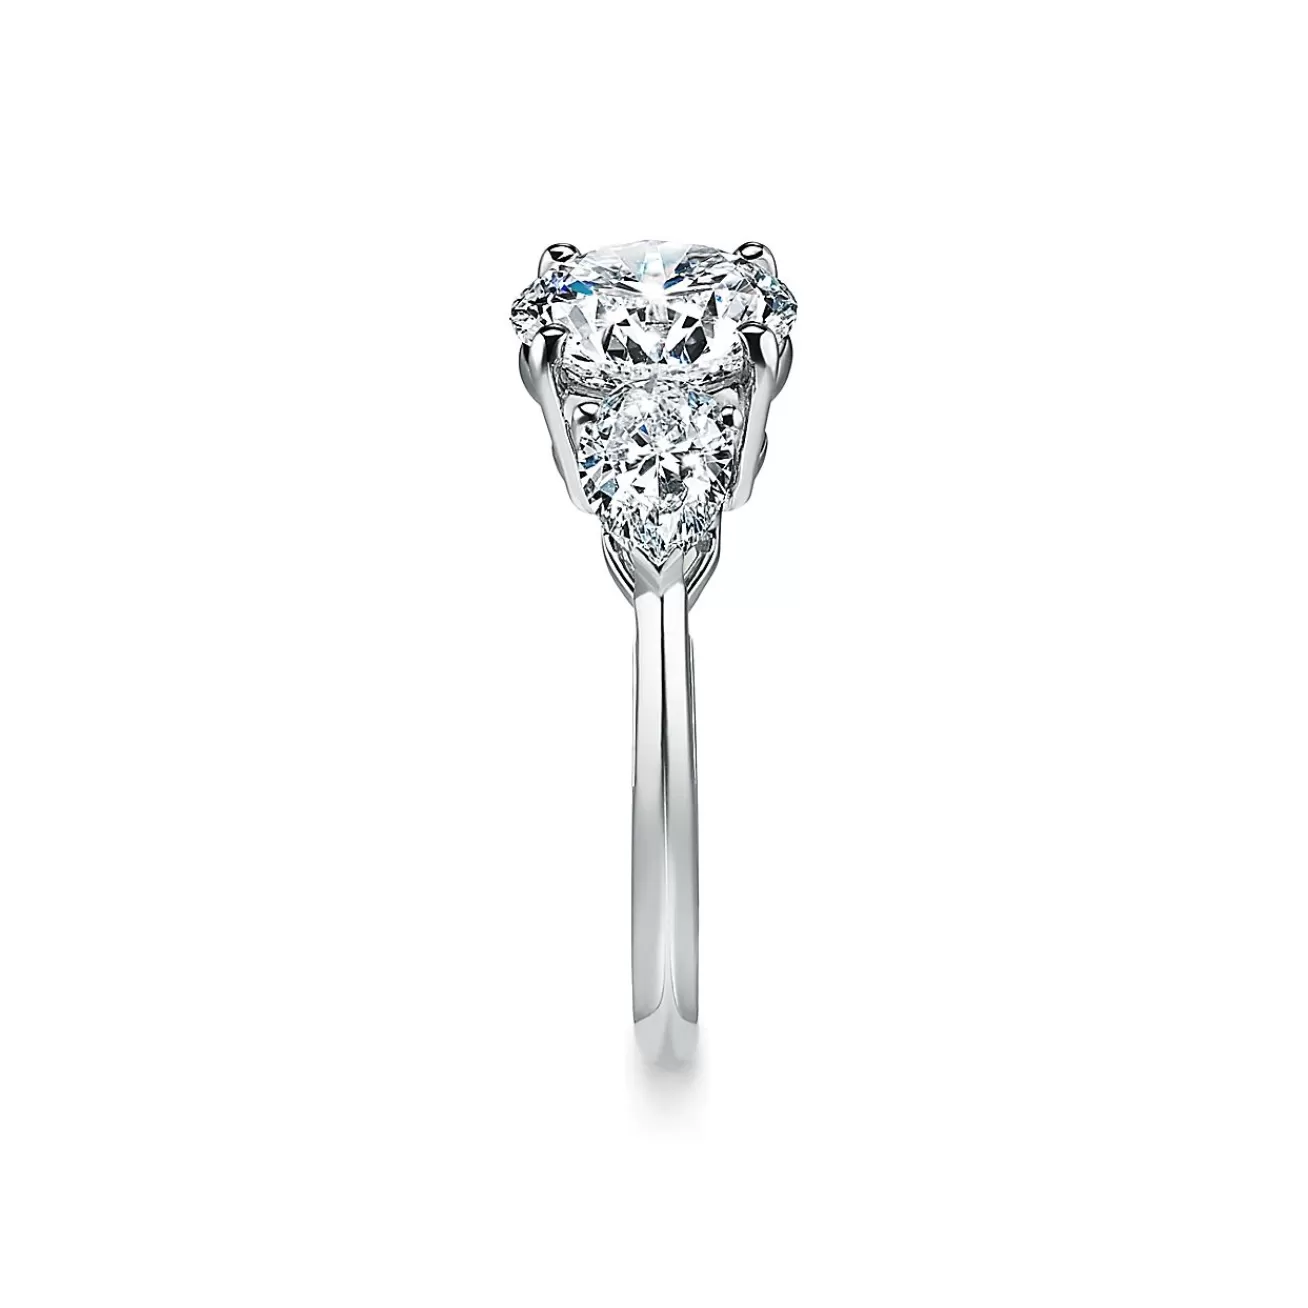 Tiffany & Co. Tiffany Three Stone engagement ring with pear-shaped side stones in platinum. | ^ Engagement Rings